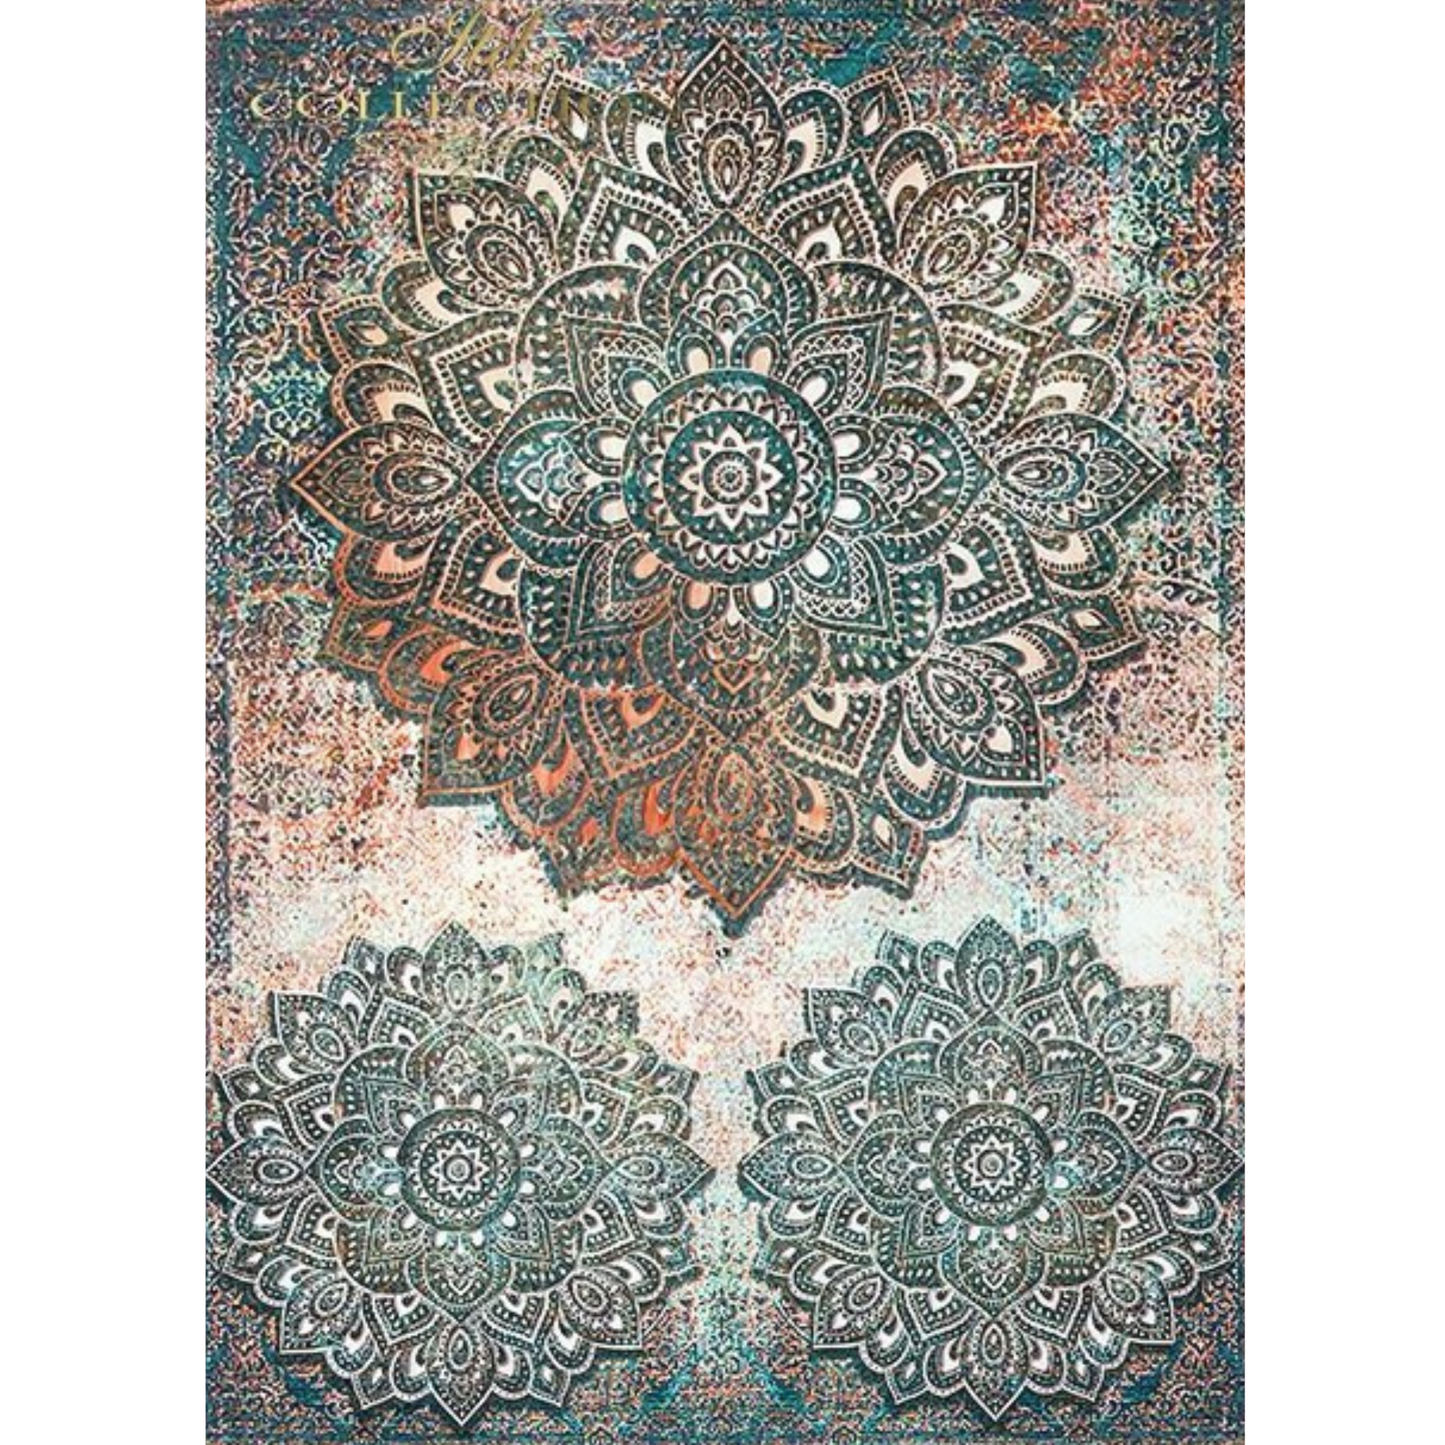 "Textured Mandalas" decoupage rice paper by ITD Collection available at Milton's Daughter